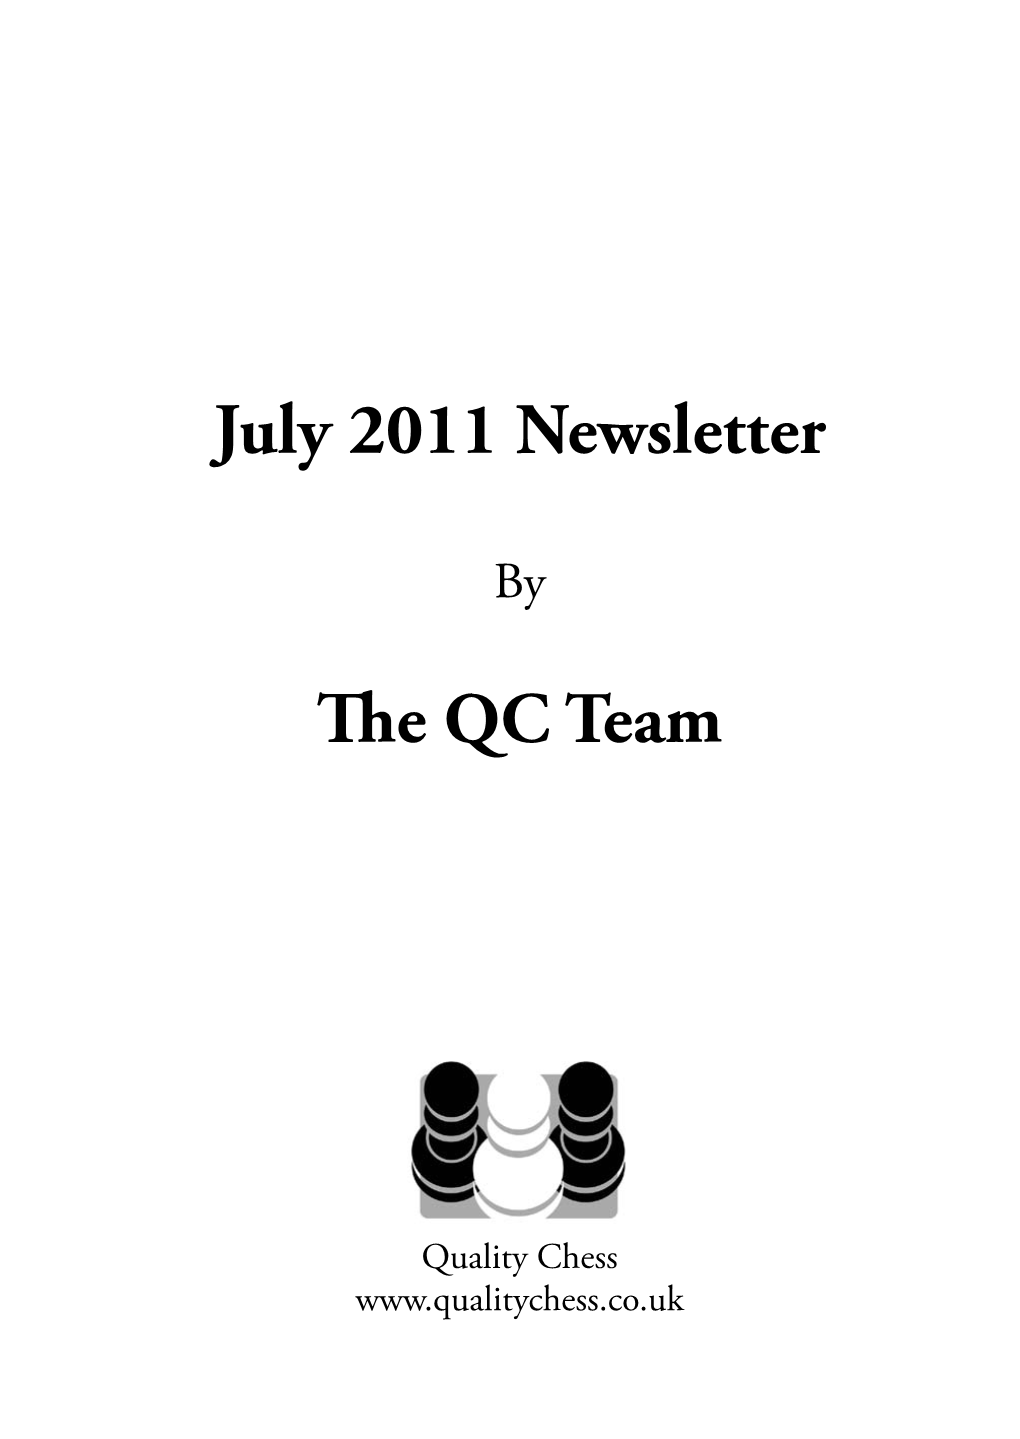 July 2011 Newsletter the QC Team